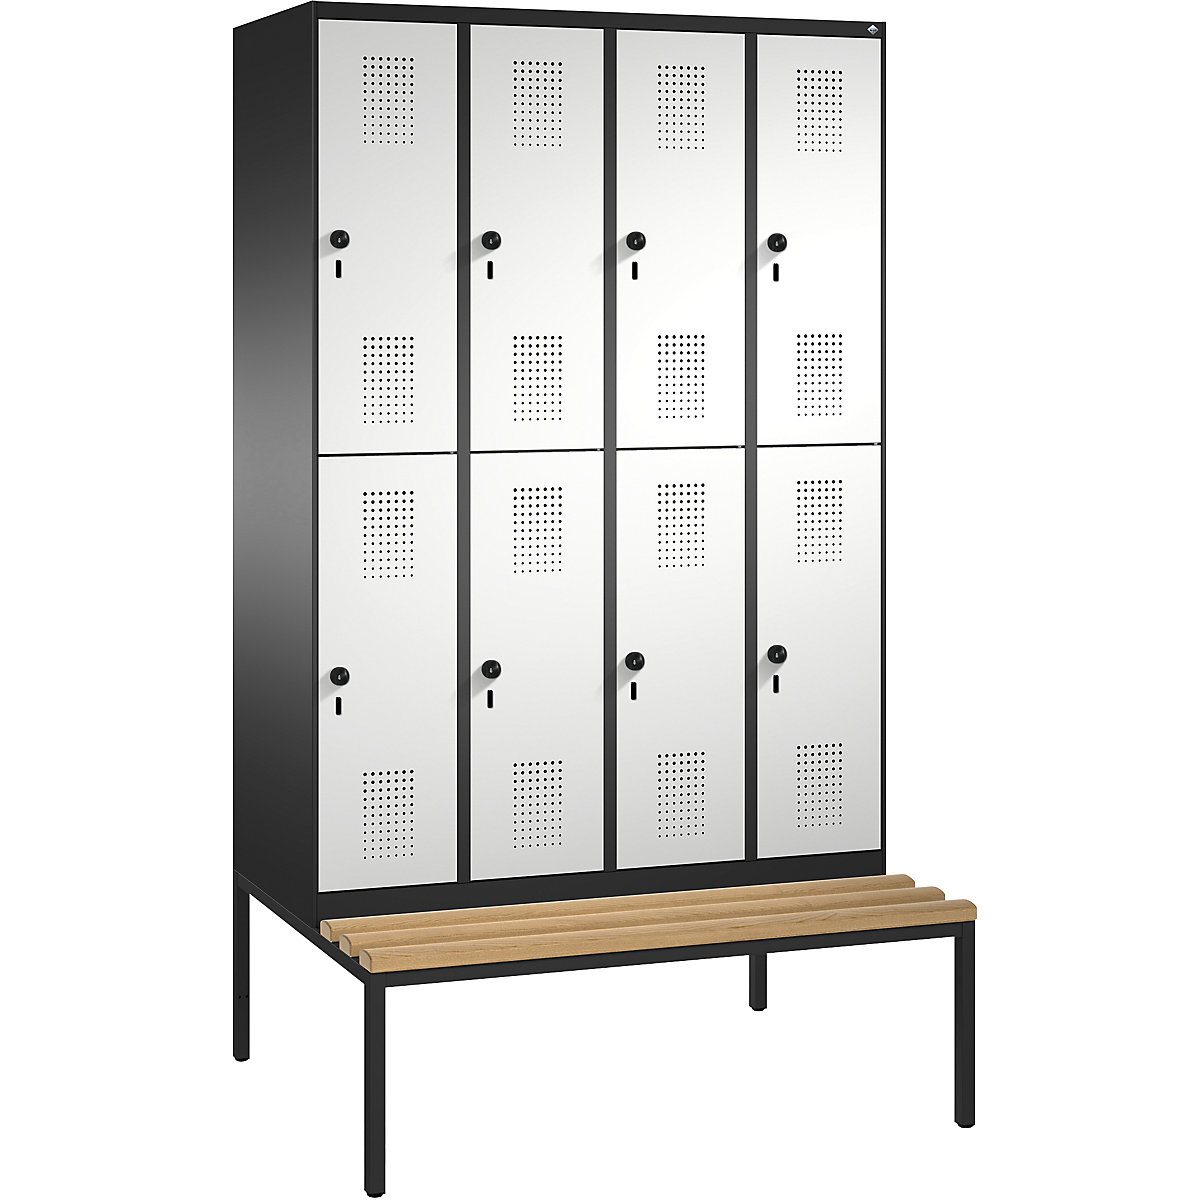 EVOLO cloakroom locker, double tier, with bench – C+P, 4 compartments, 2 shelf compartments each, compartment width 300 mm, black grey / light grey-12